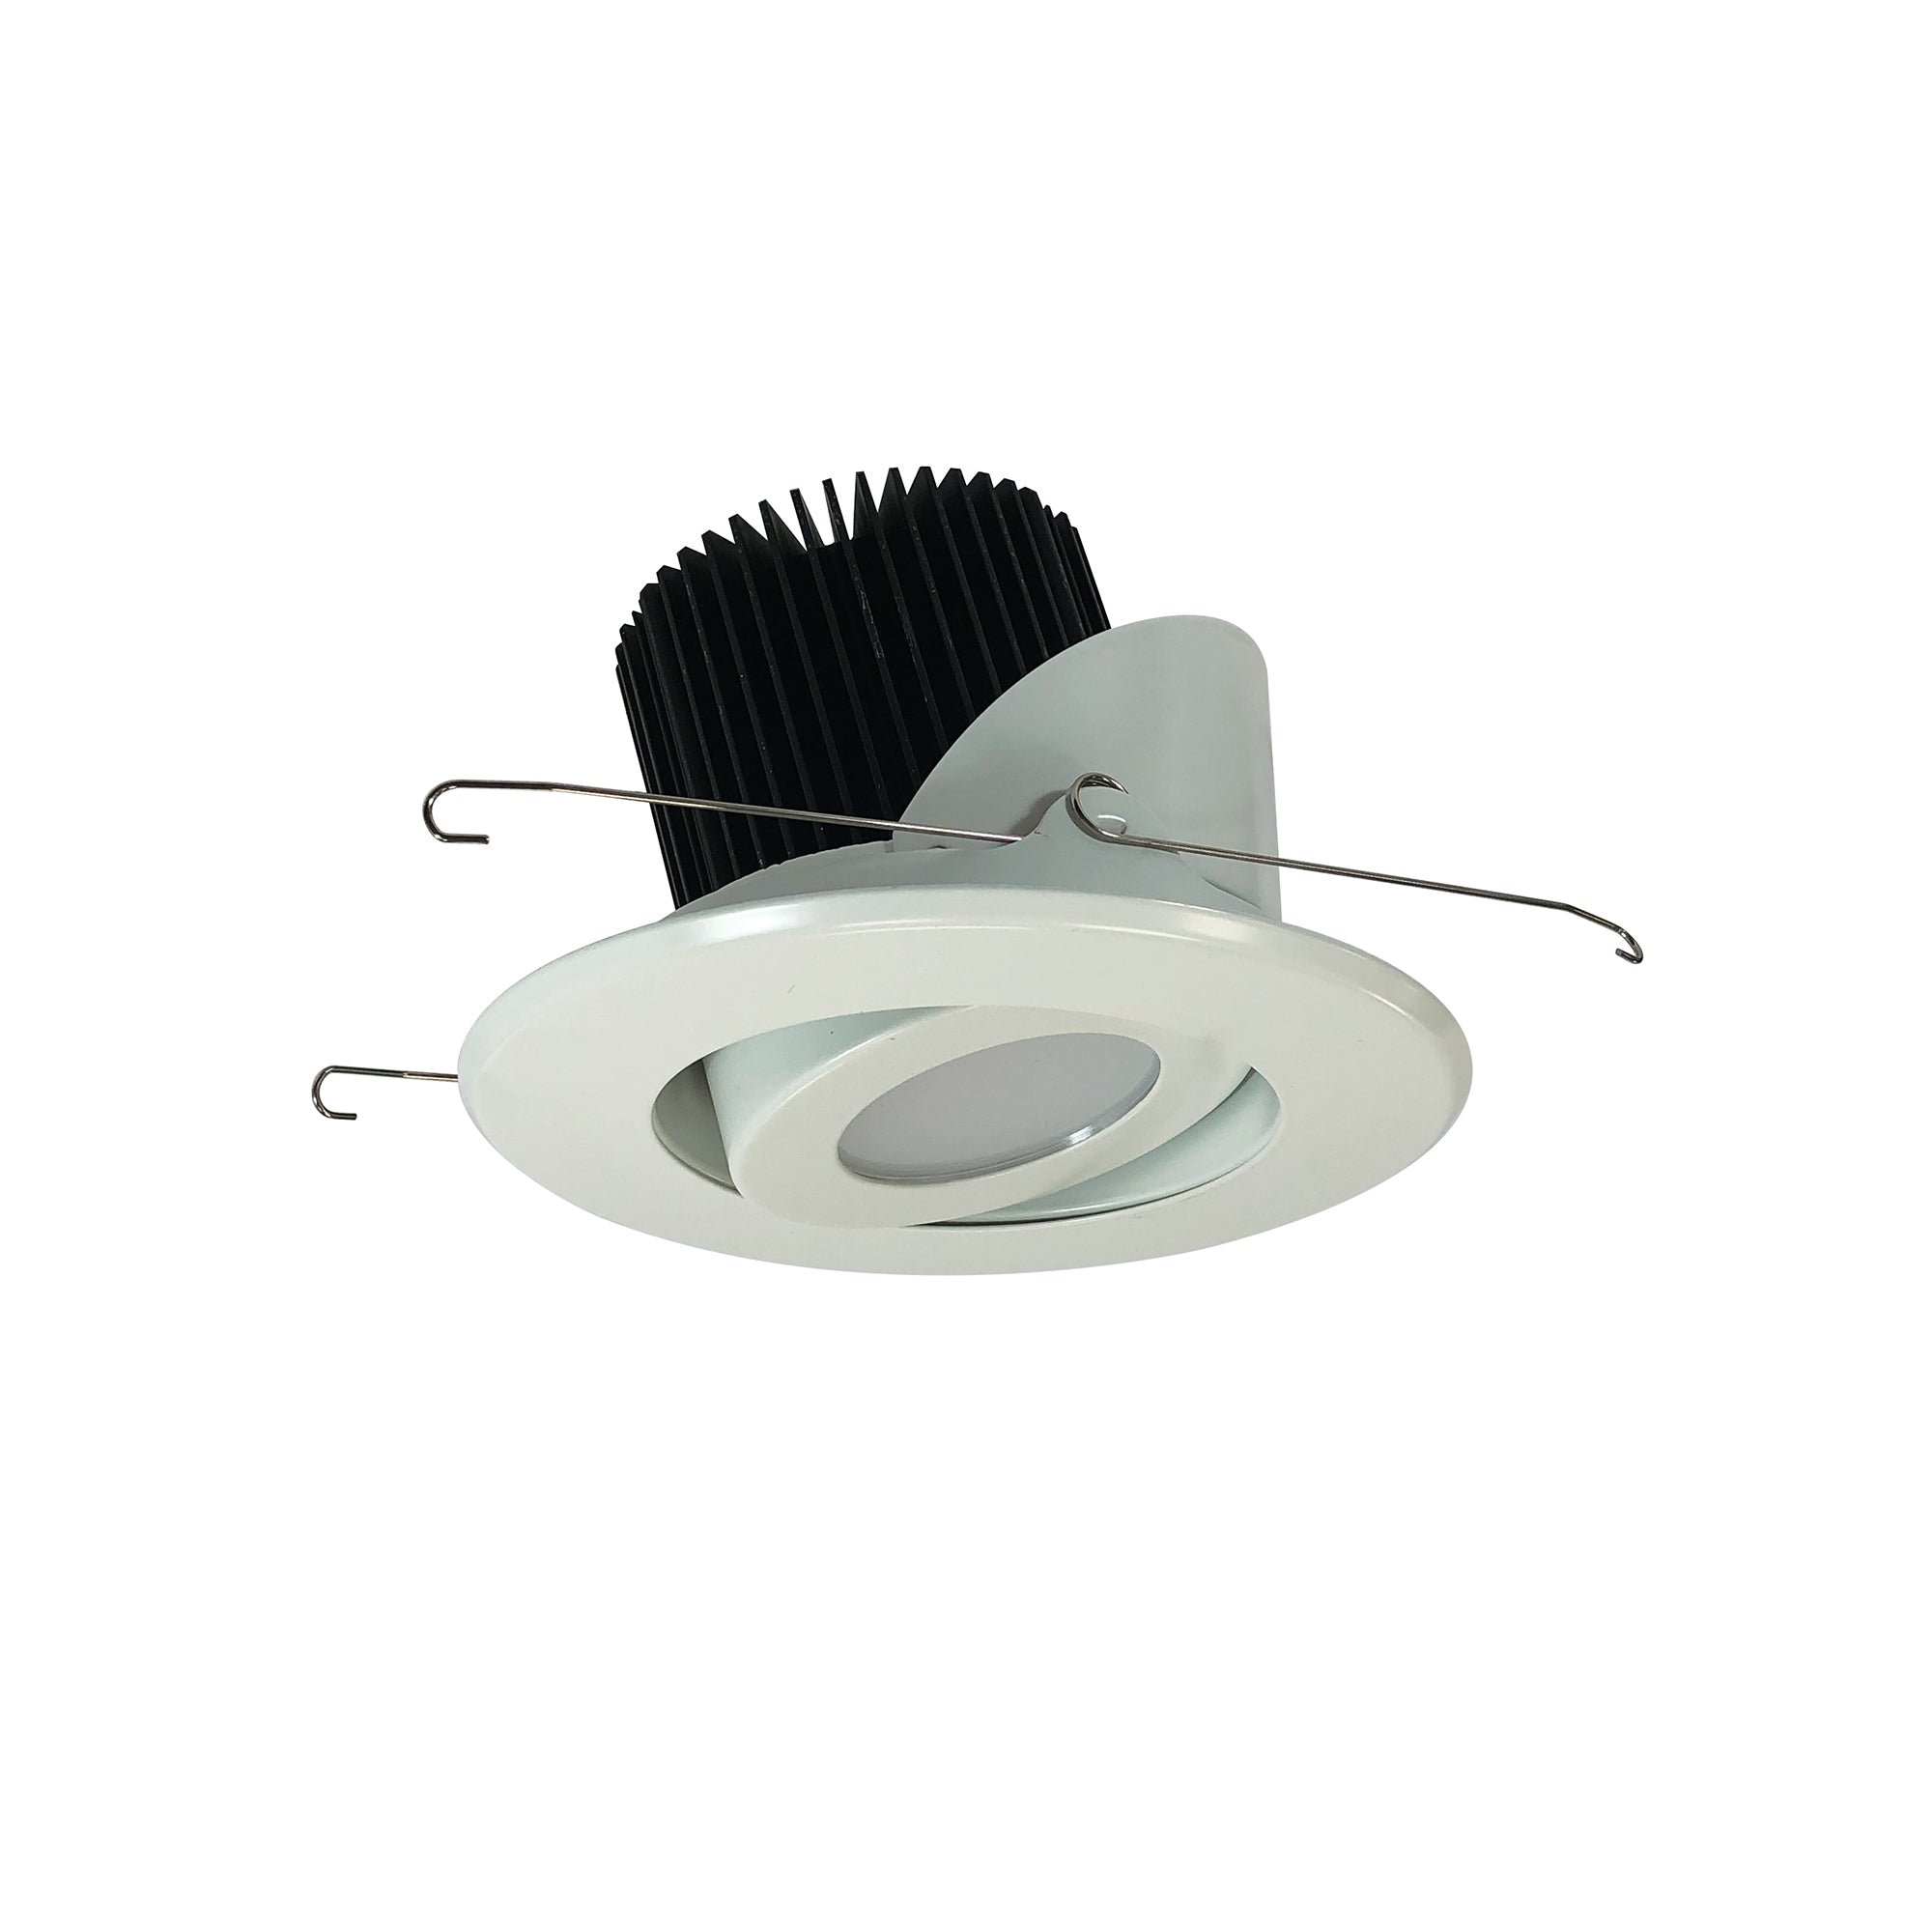 Nora Lighting LE70 - NRM2-514L1530MWW - Recessed - White